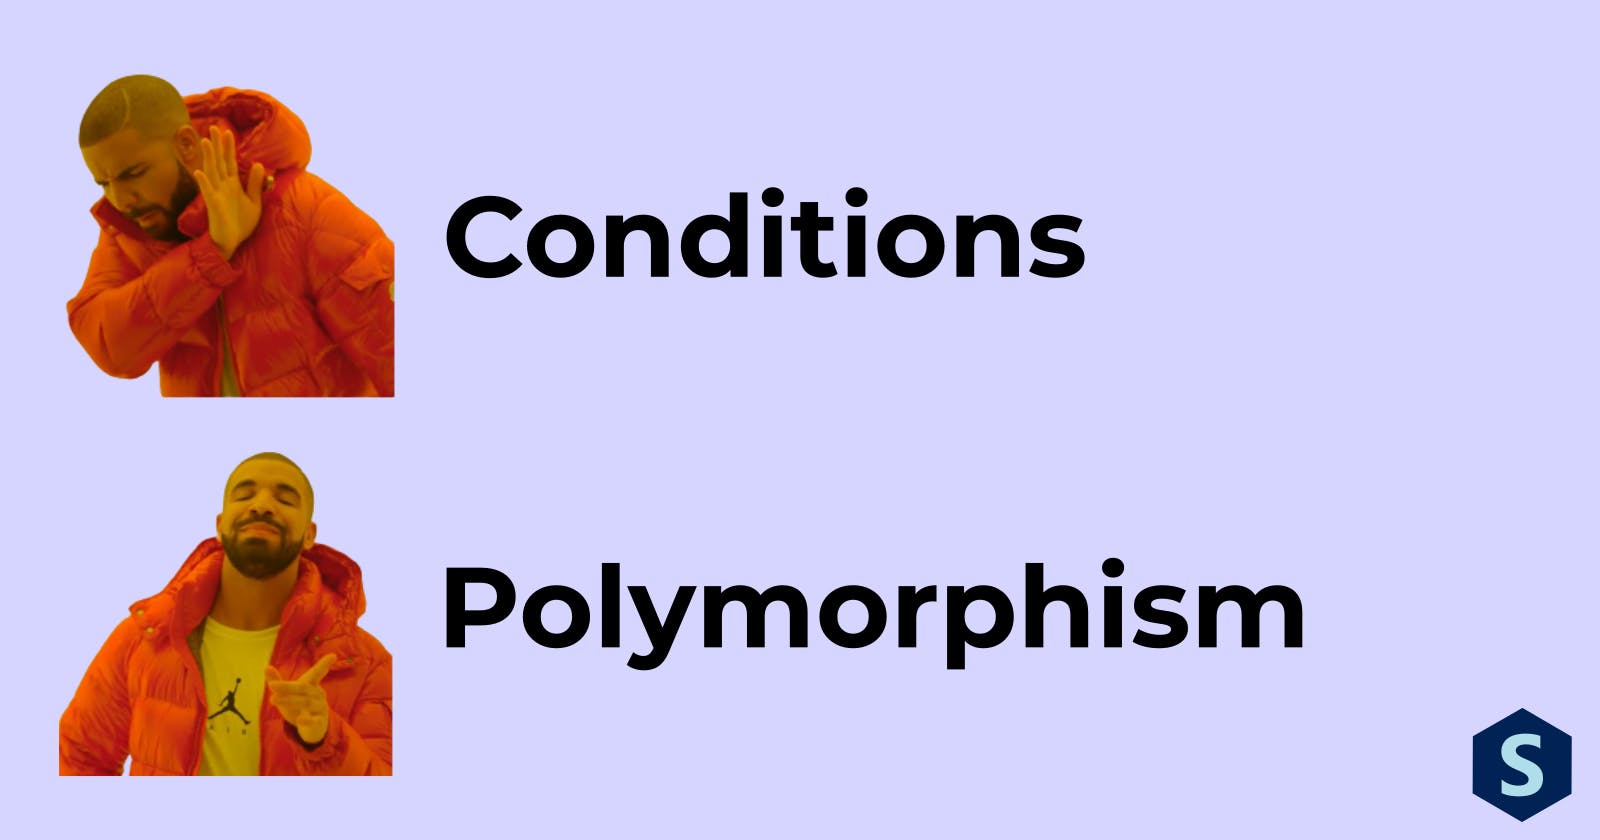 Conditions? More like Polymorphism